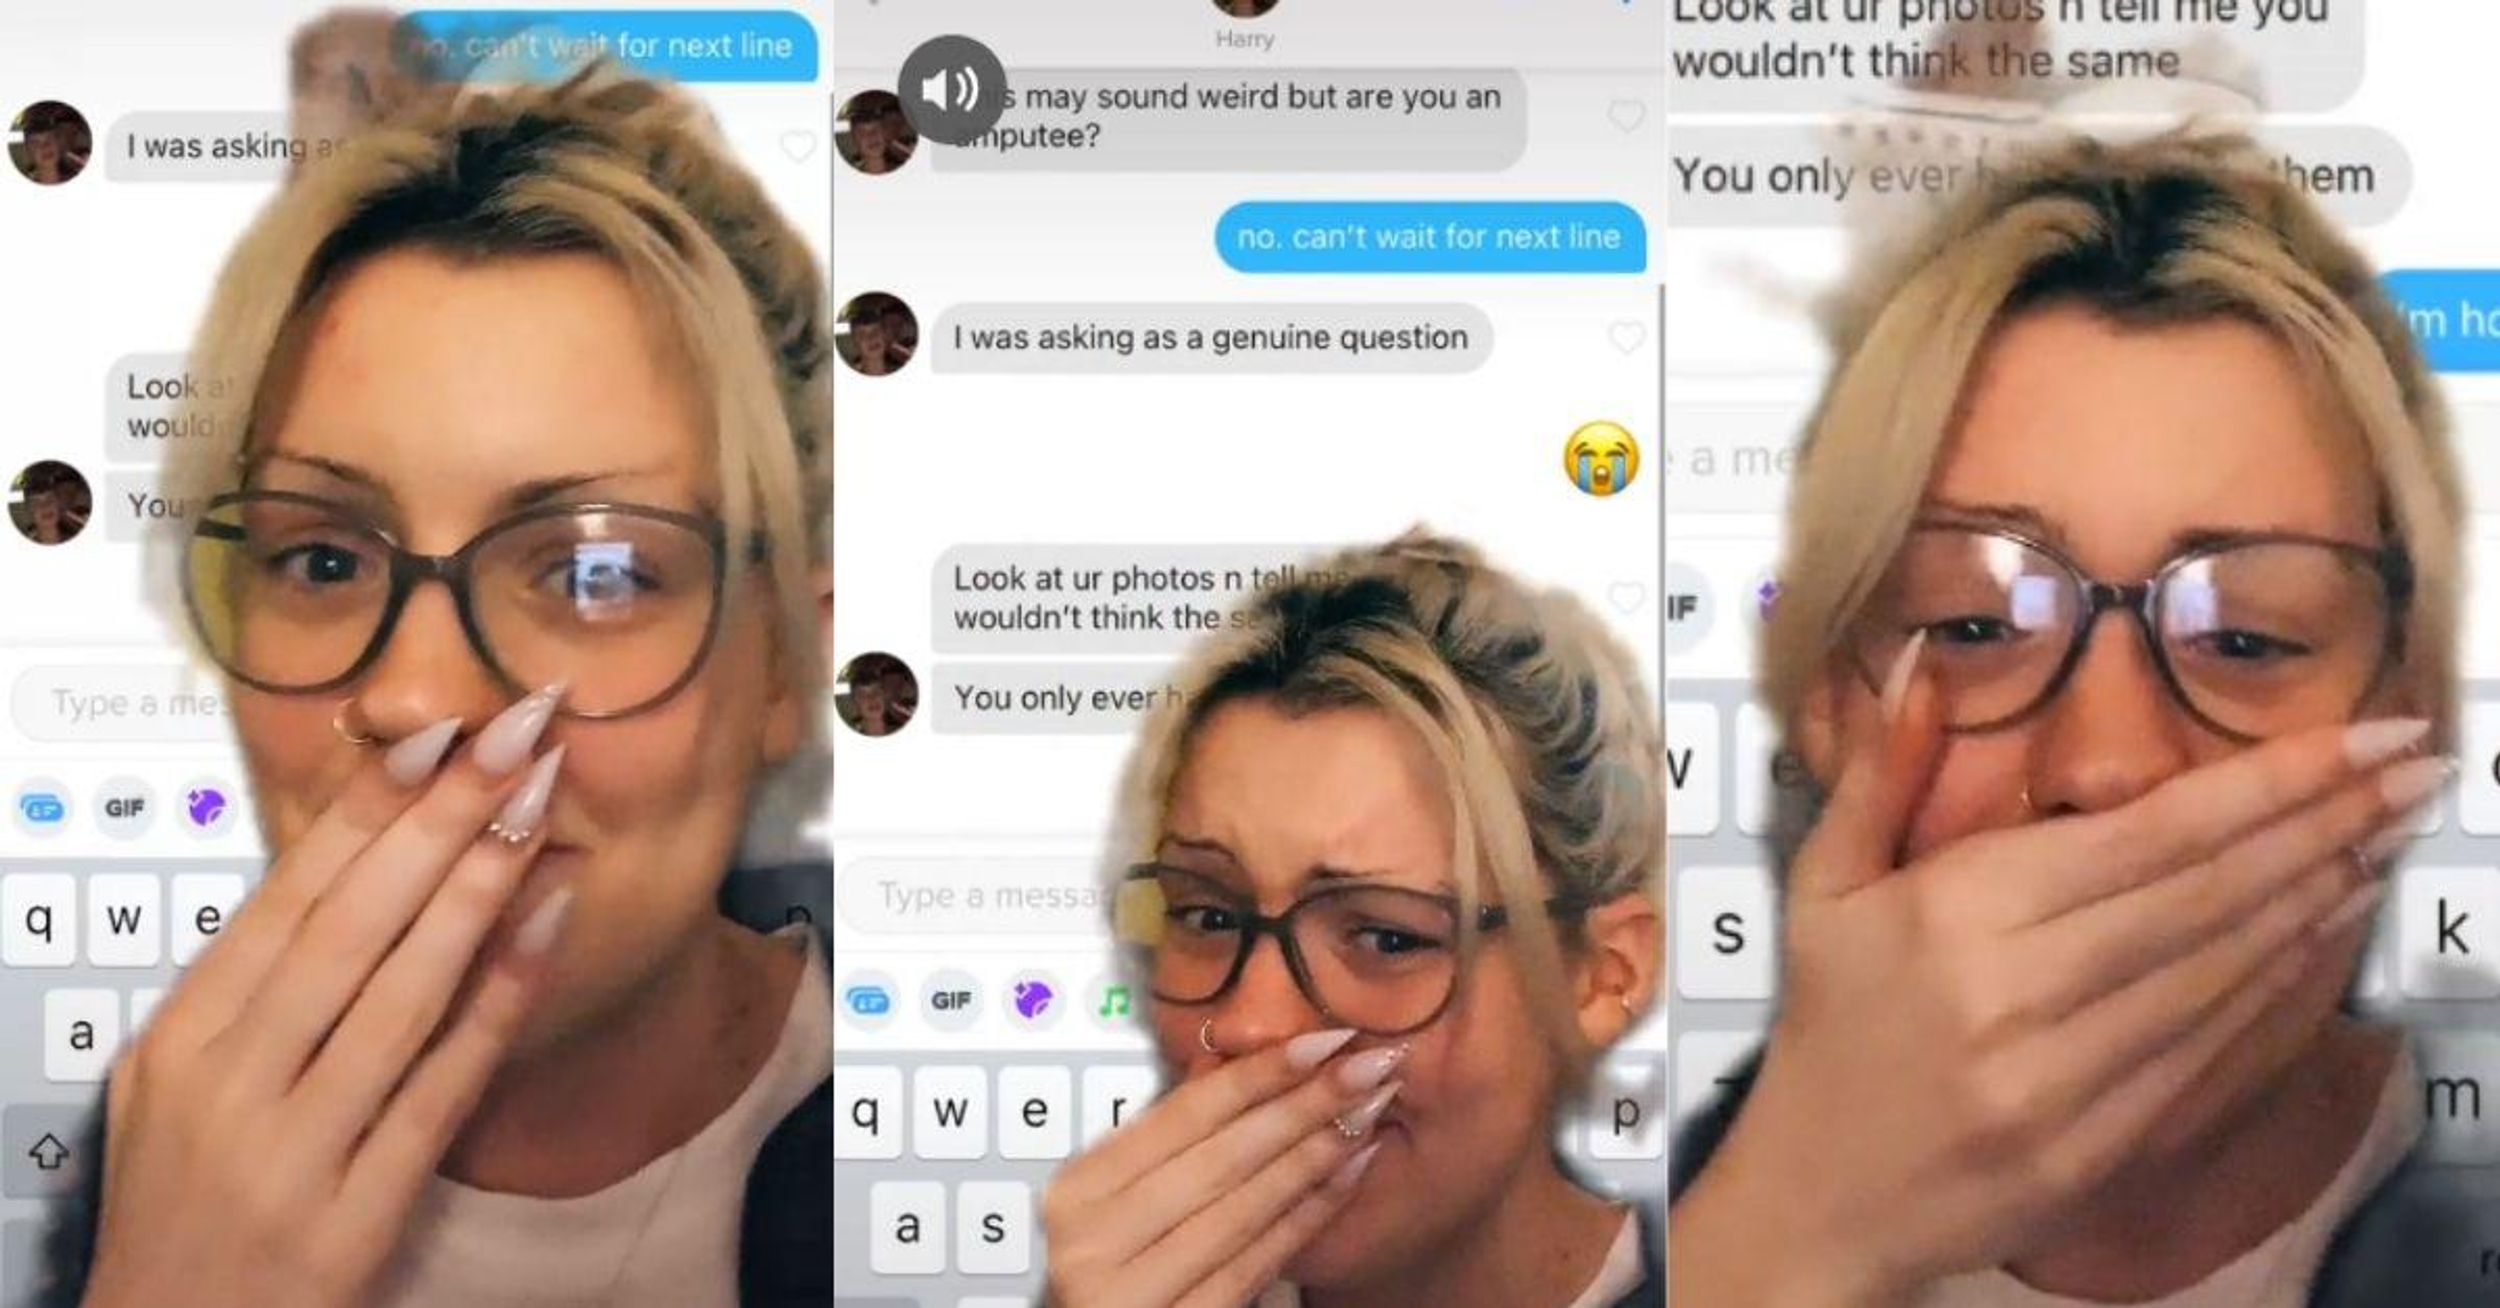 Woman Stunned After Guy On Dating App Asks If She's An Amputee Due To Her Profile Photos